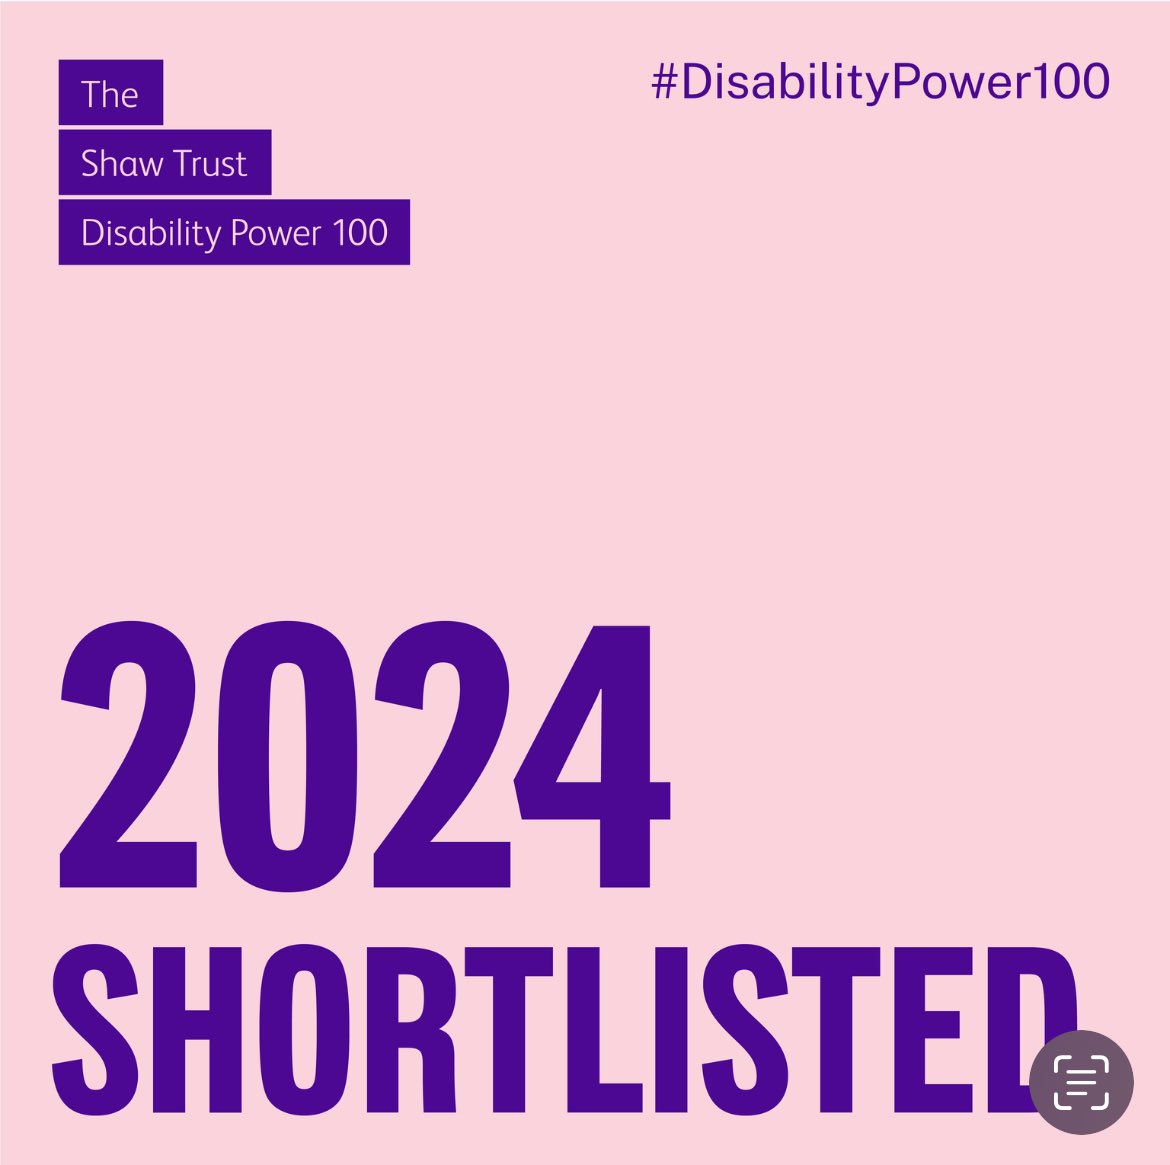 I am delighted to share I has been nominated and shortlisted for my work in the disabled community, with setting up AIMS for Life - Coaching for Disabled People (Community Interest Company) and through my history work, on the Shaw Trust Disability Power 100. #DisabilityPower100.